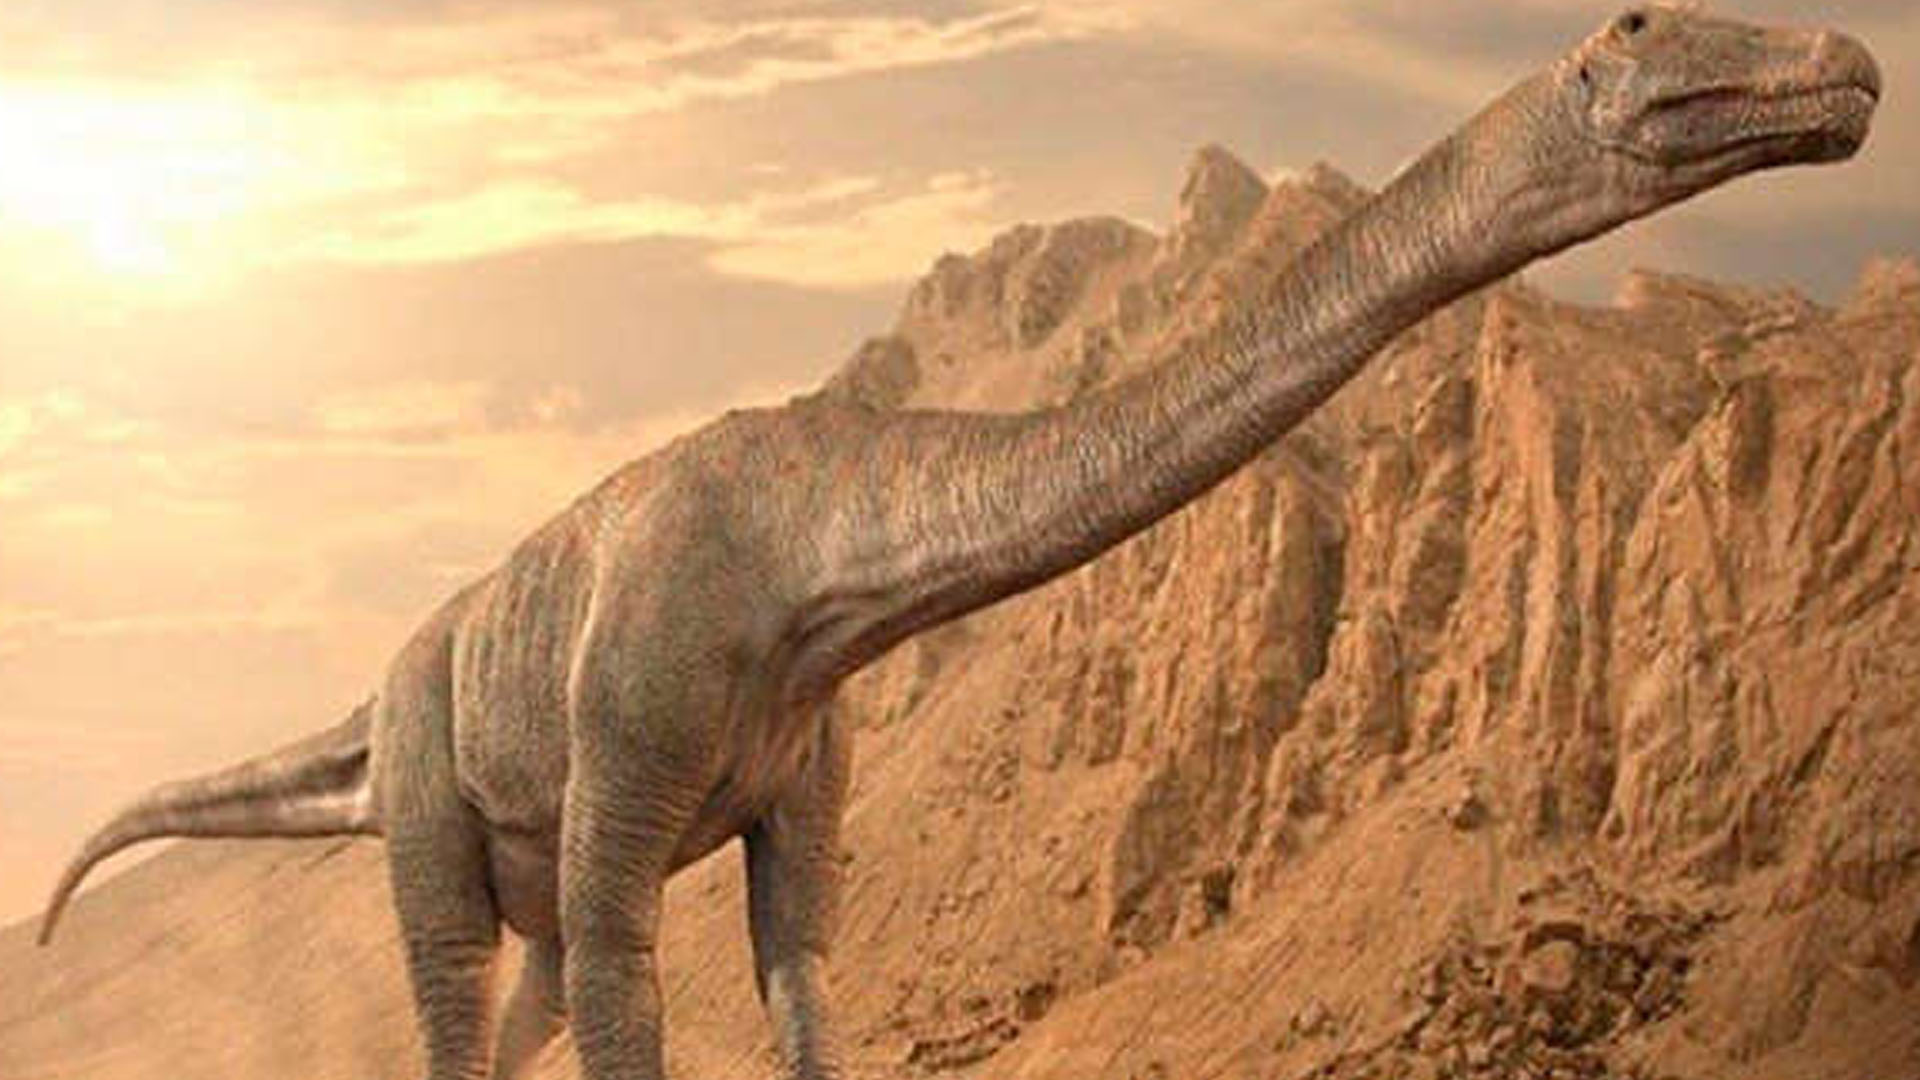 The titanosaur is among the largest animals on Earth.